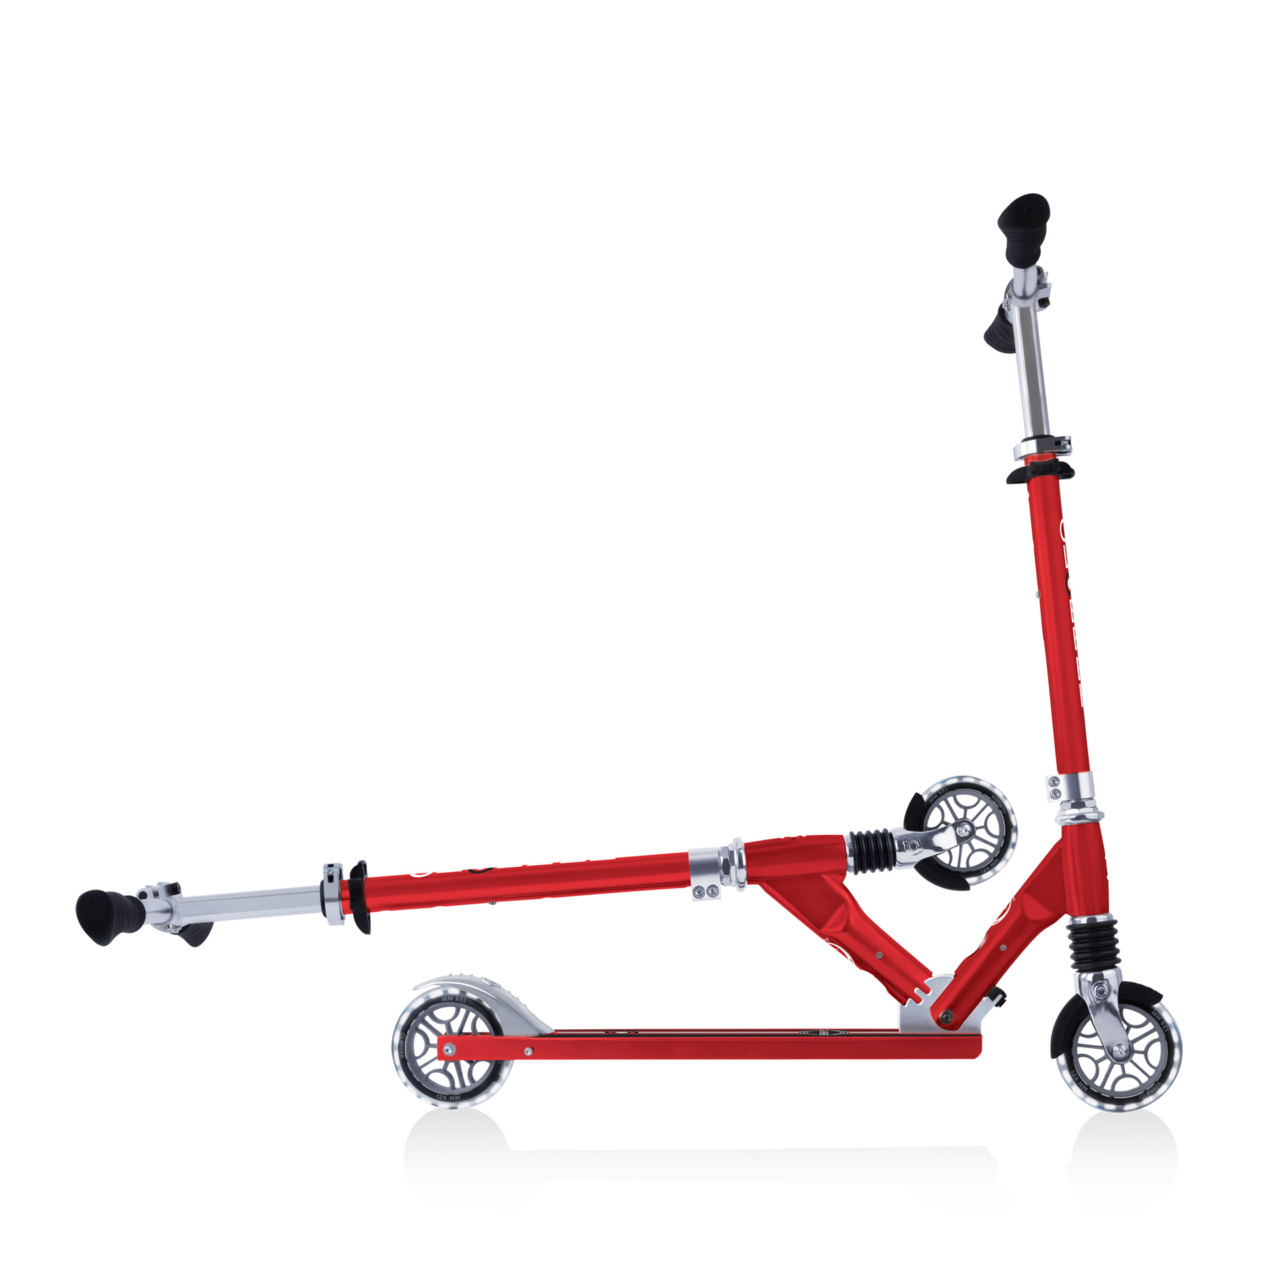 727 102 Fold Up Scooter With Flashing Wheels